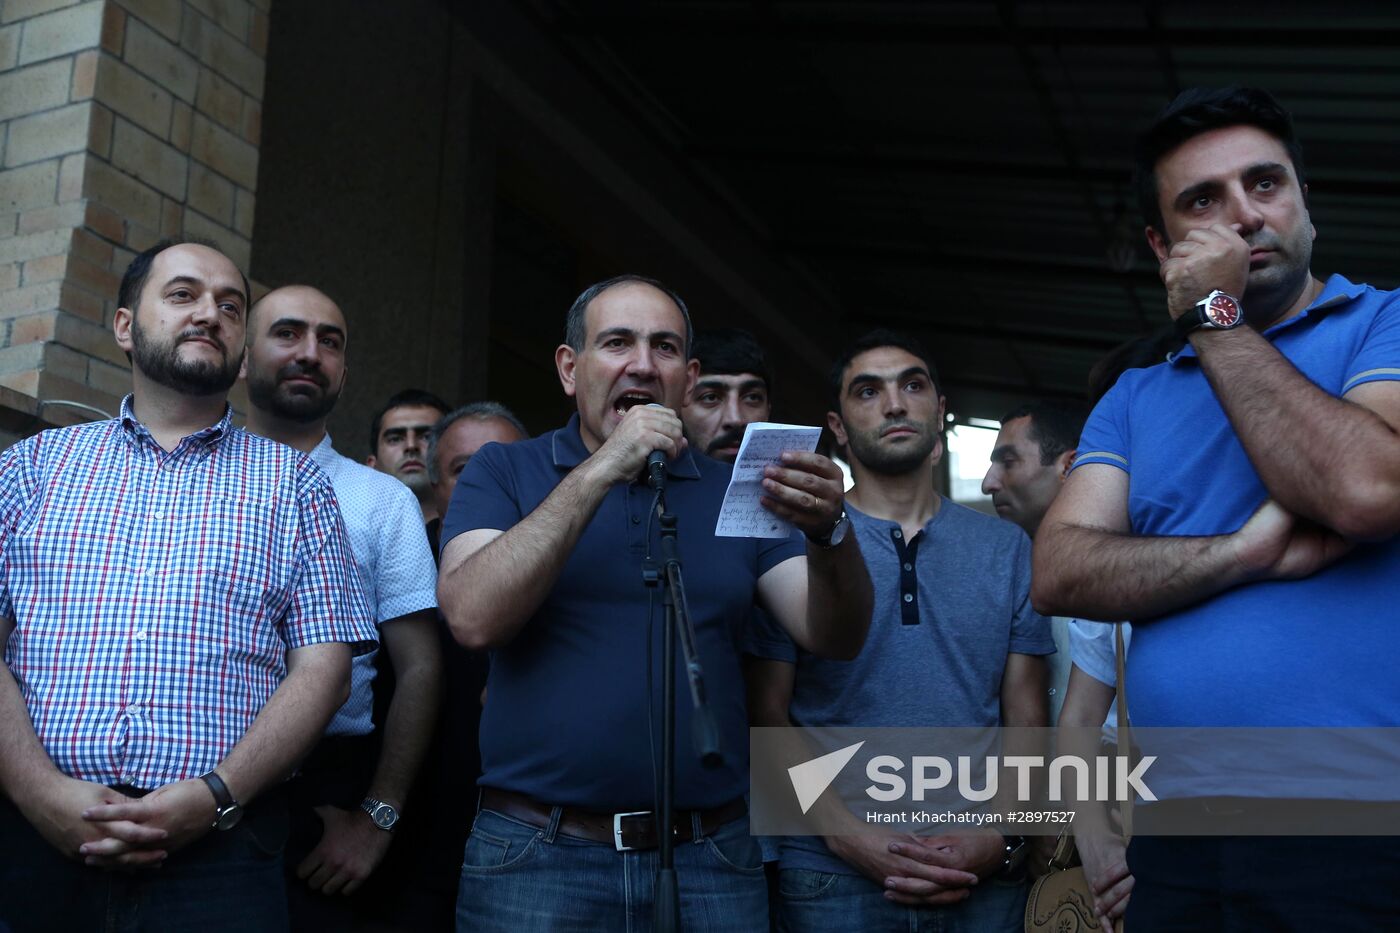 Situation near police station seized in Yerevan